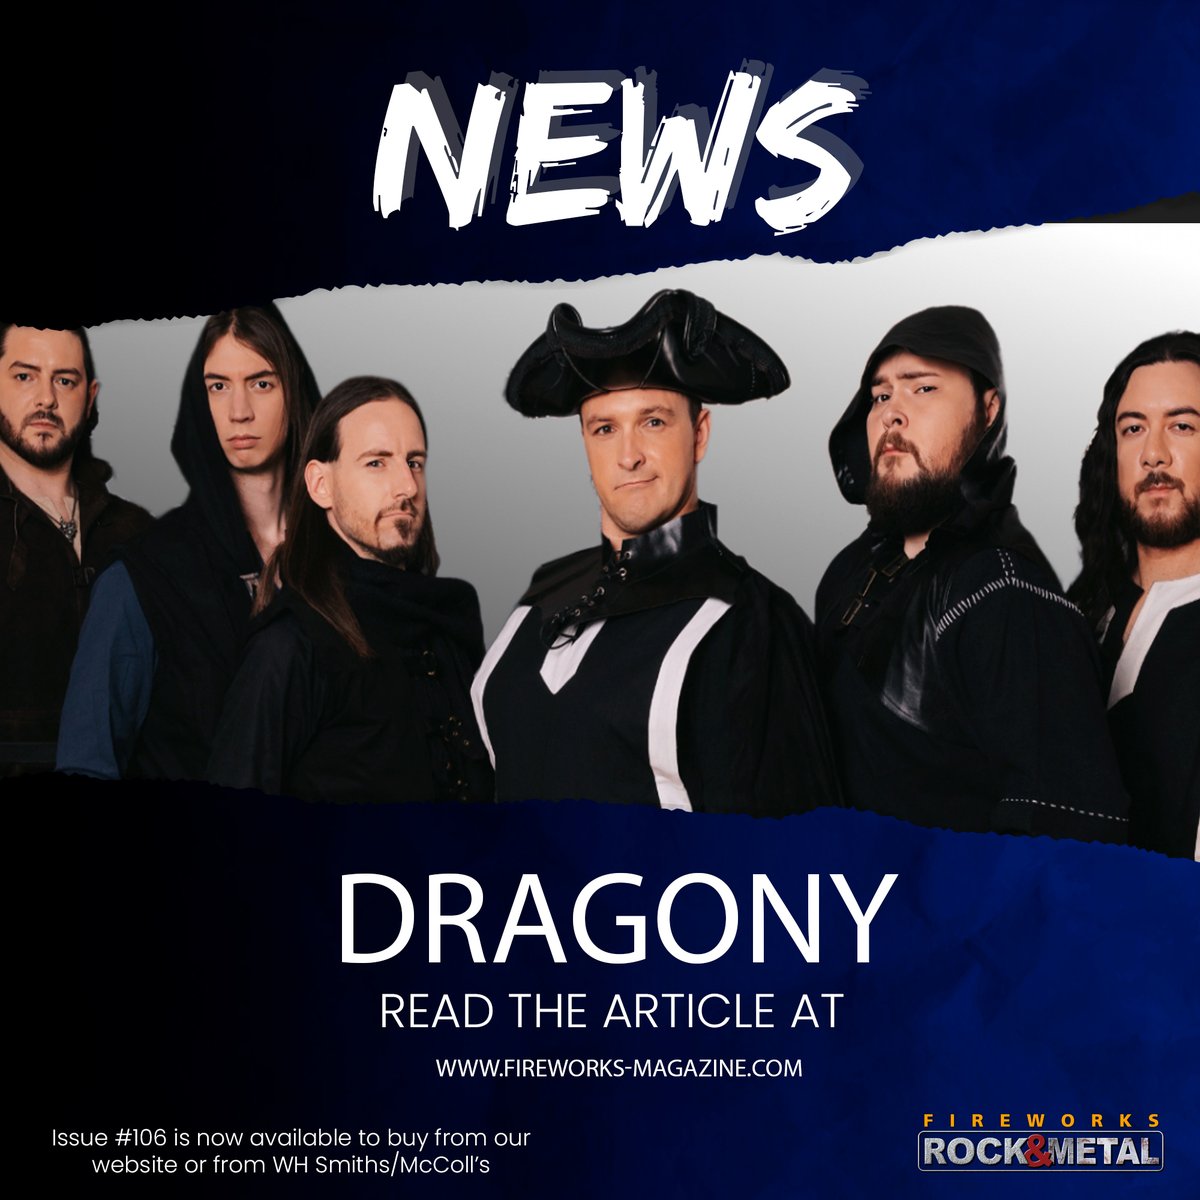 𝗘𝗫𝗖𝗘𝗟𝗟𝗘𝗡𝗧! DRAGONY sign with SPV / Steamhammer 𝘙𝘦𝘢𝘥 𝘵𝘩𝘦 𝘢𝘳𝘵𝘪𝘤𝘭𝘦 𝘩𝘦𝘳𝘦: wix.to/2WRMp5o -- BUY Issue #106 from fireworks-magazine.com 𝙐𝙆 𝙎𝙪𝙗𝙨𝙘𝙧𝙞𝙥𝙩𝙞𝙤𝙣𝙨 𝙣𝙤𝙬 𝙟𝙪𝙨𝙩 £32.